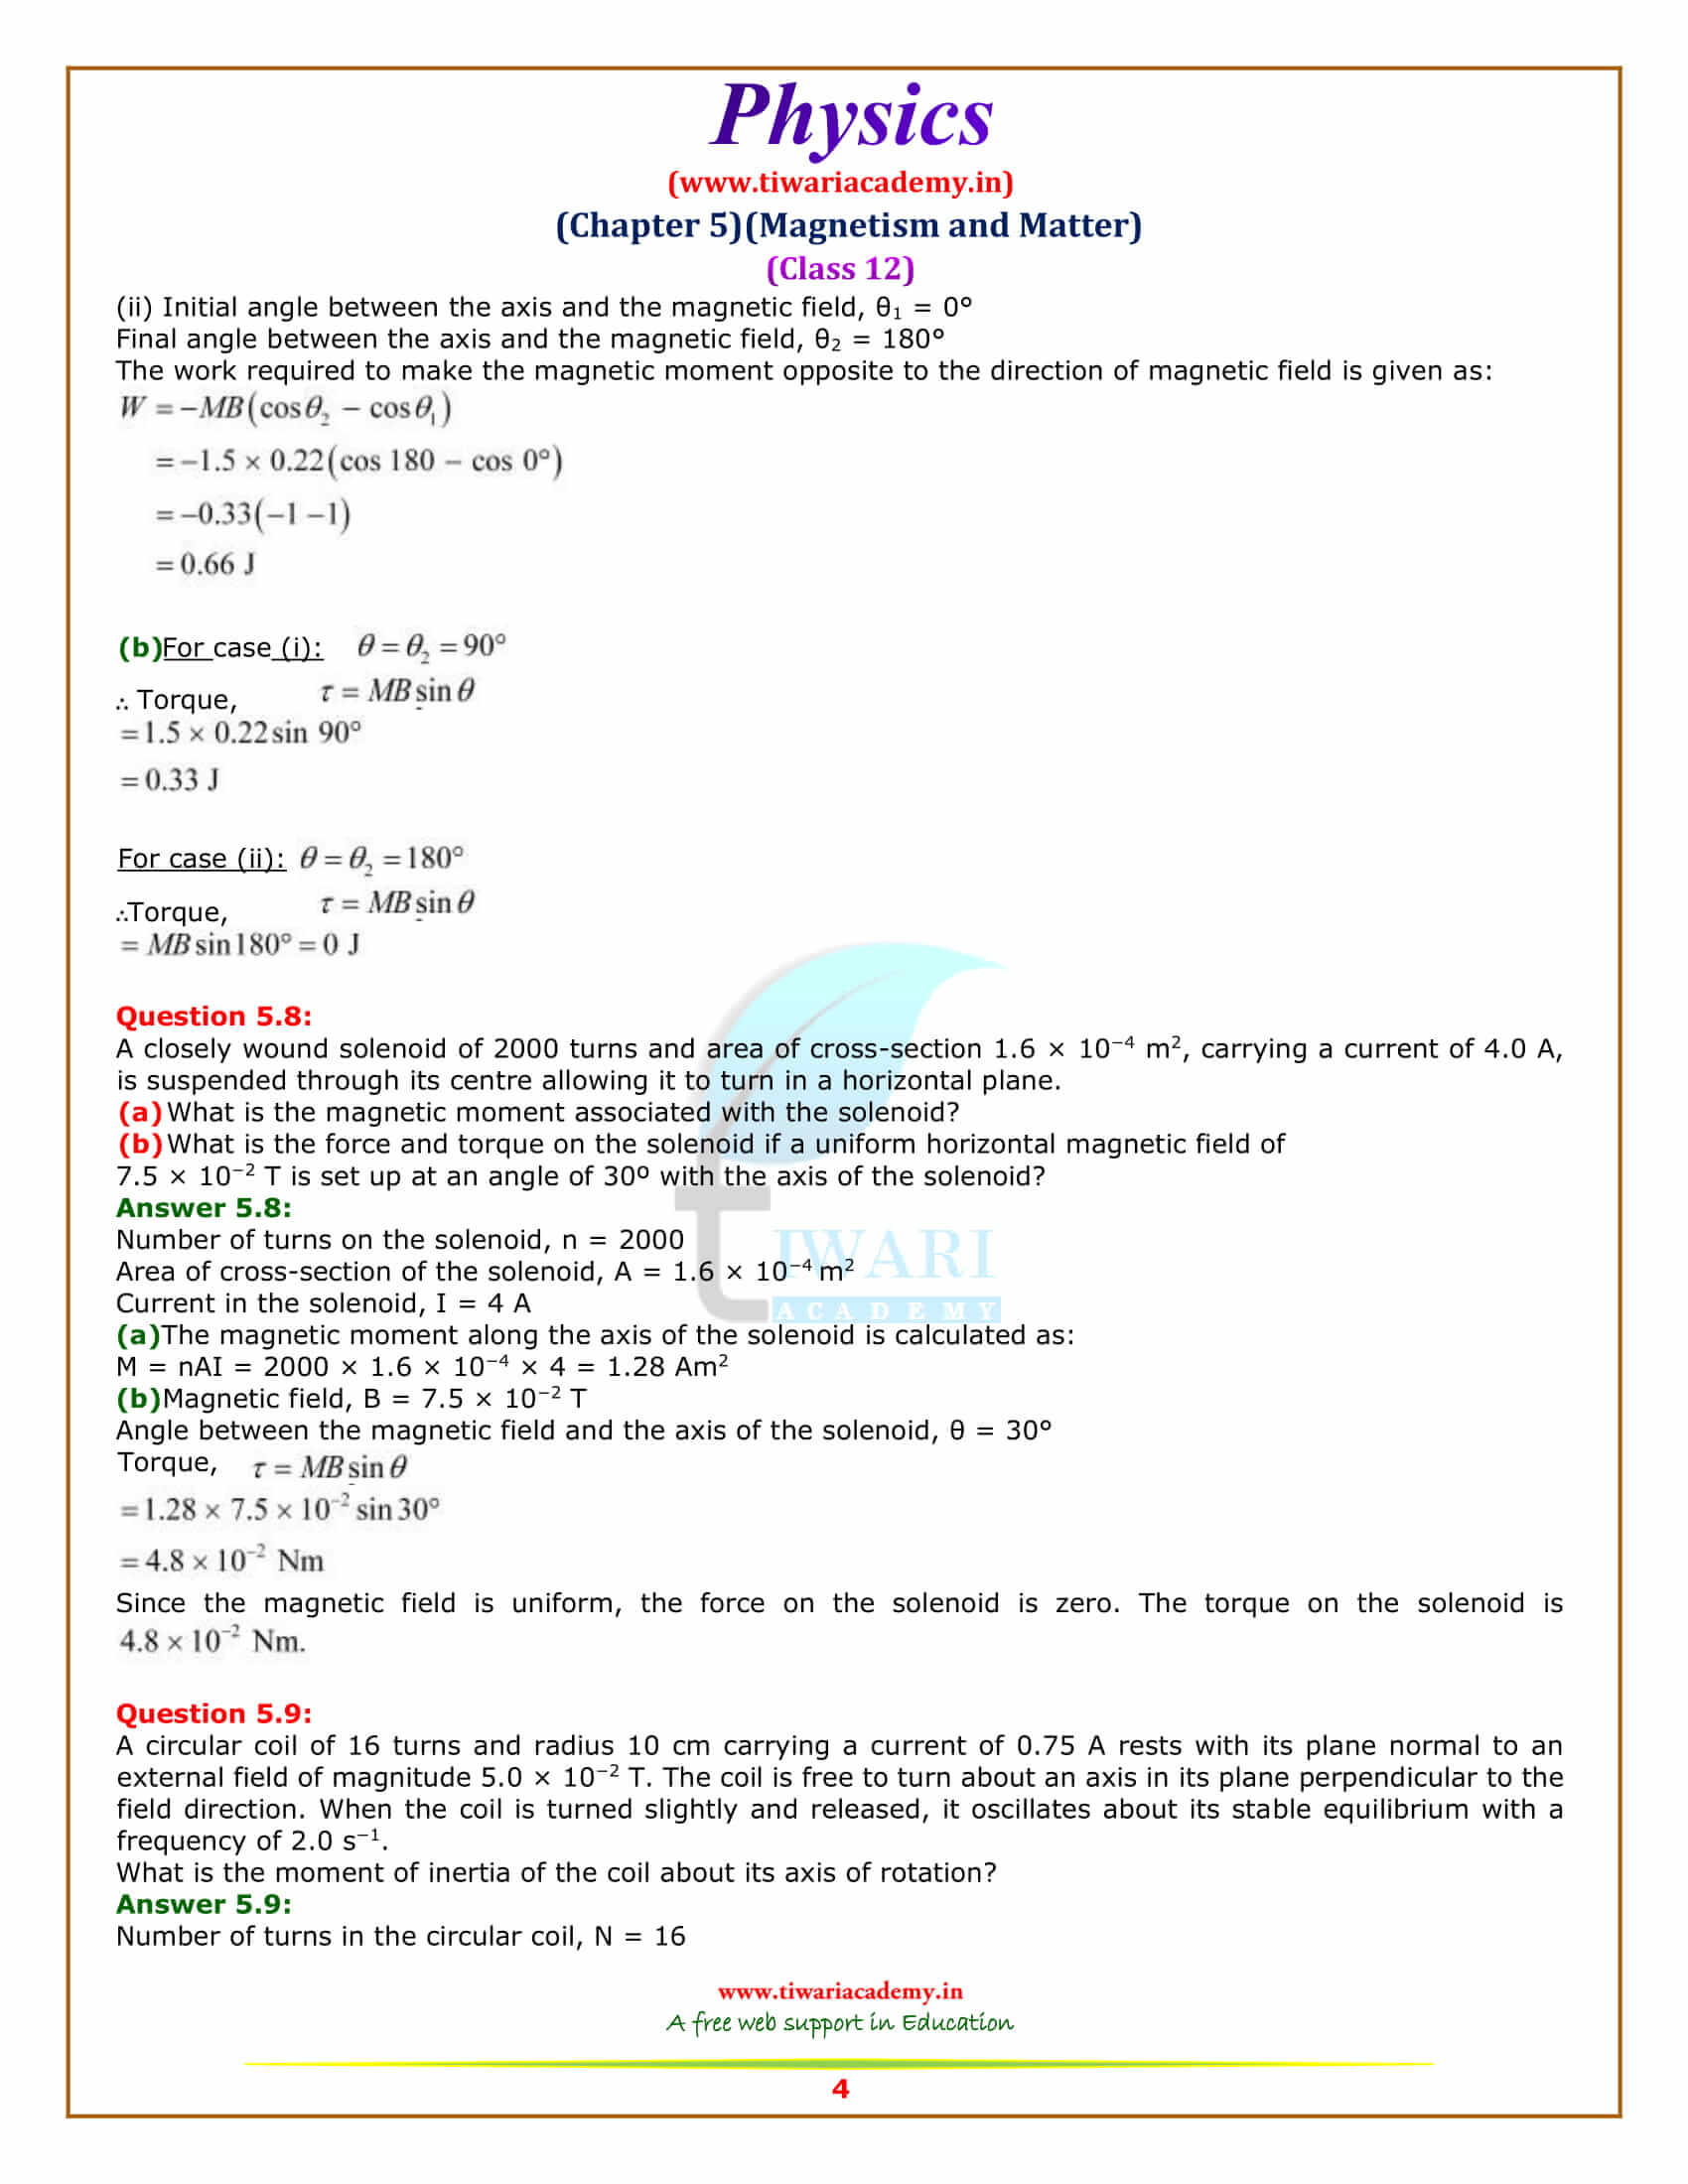 NCERT Solutions for Class 12 Physics Chapter 5 Magnetism and Matter for intermediate